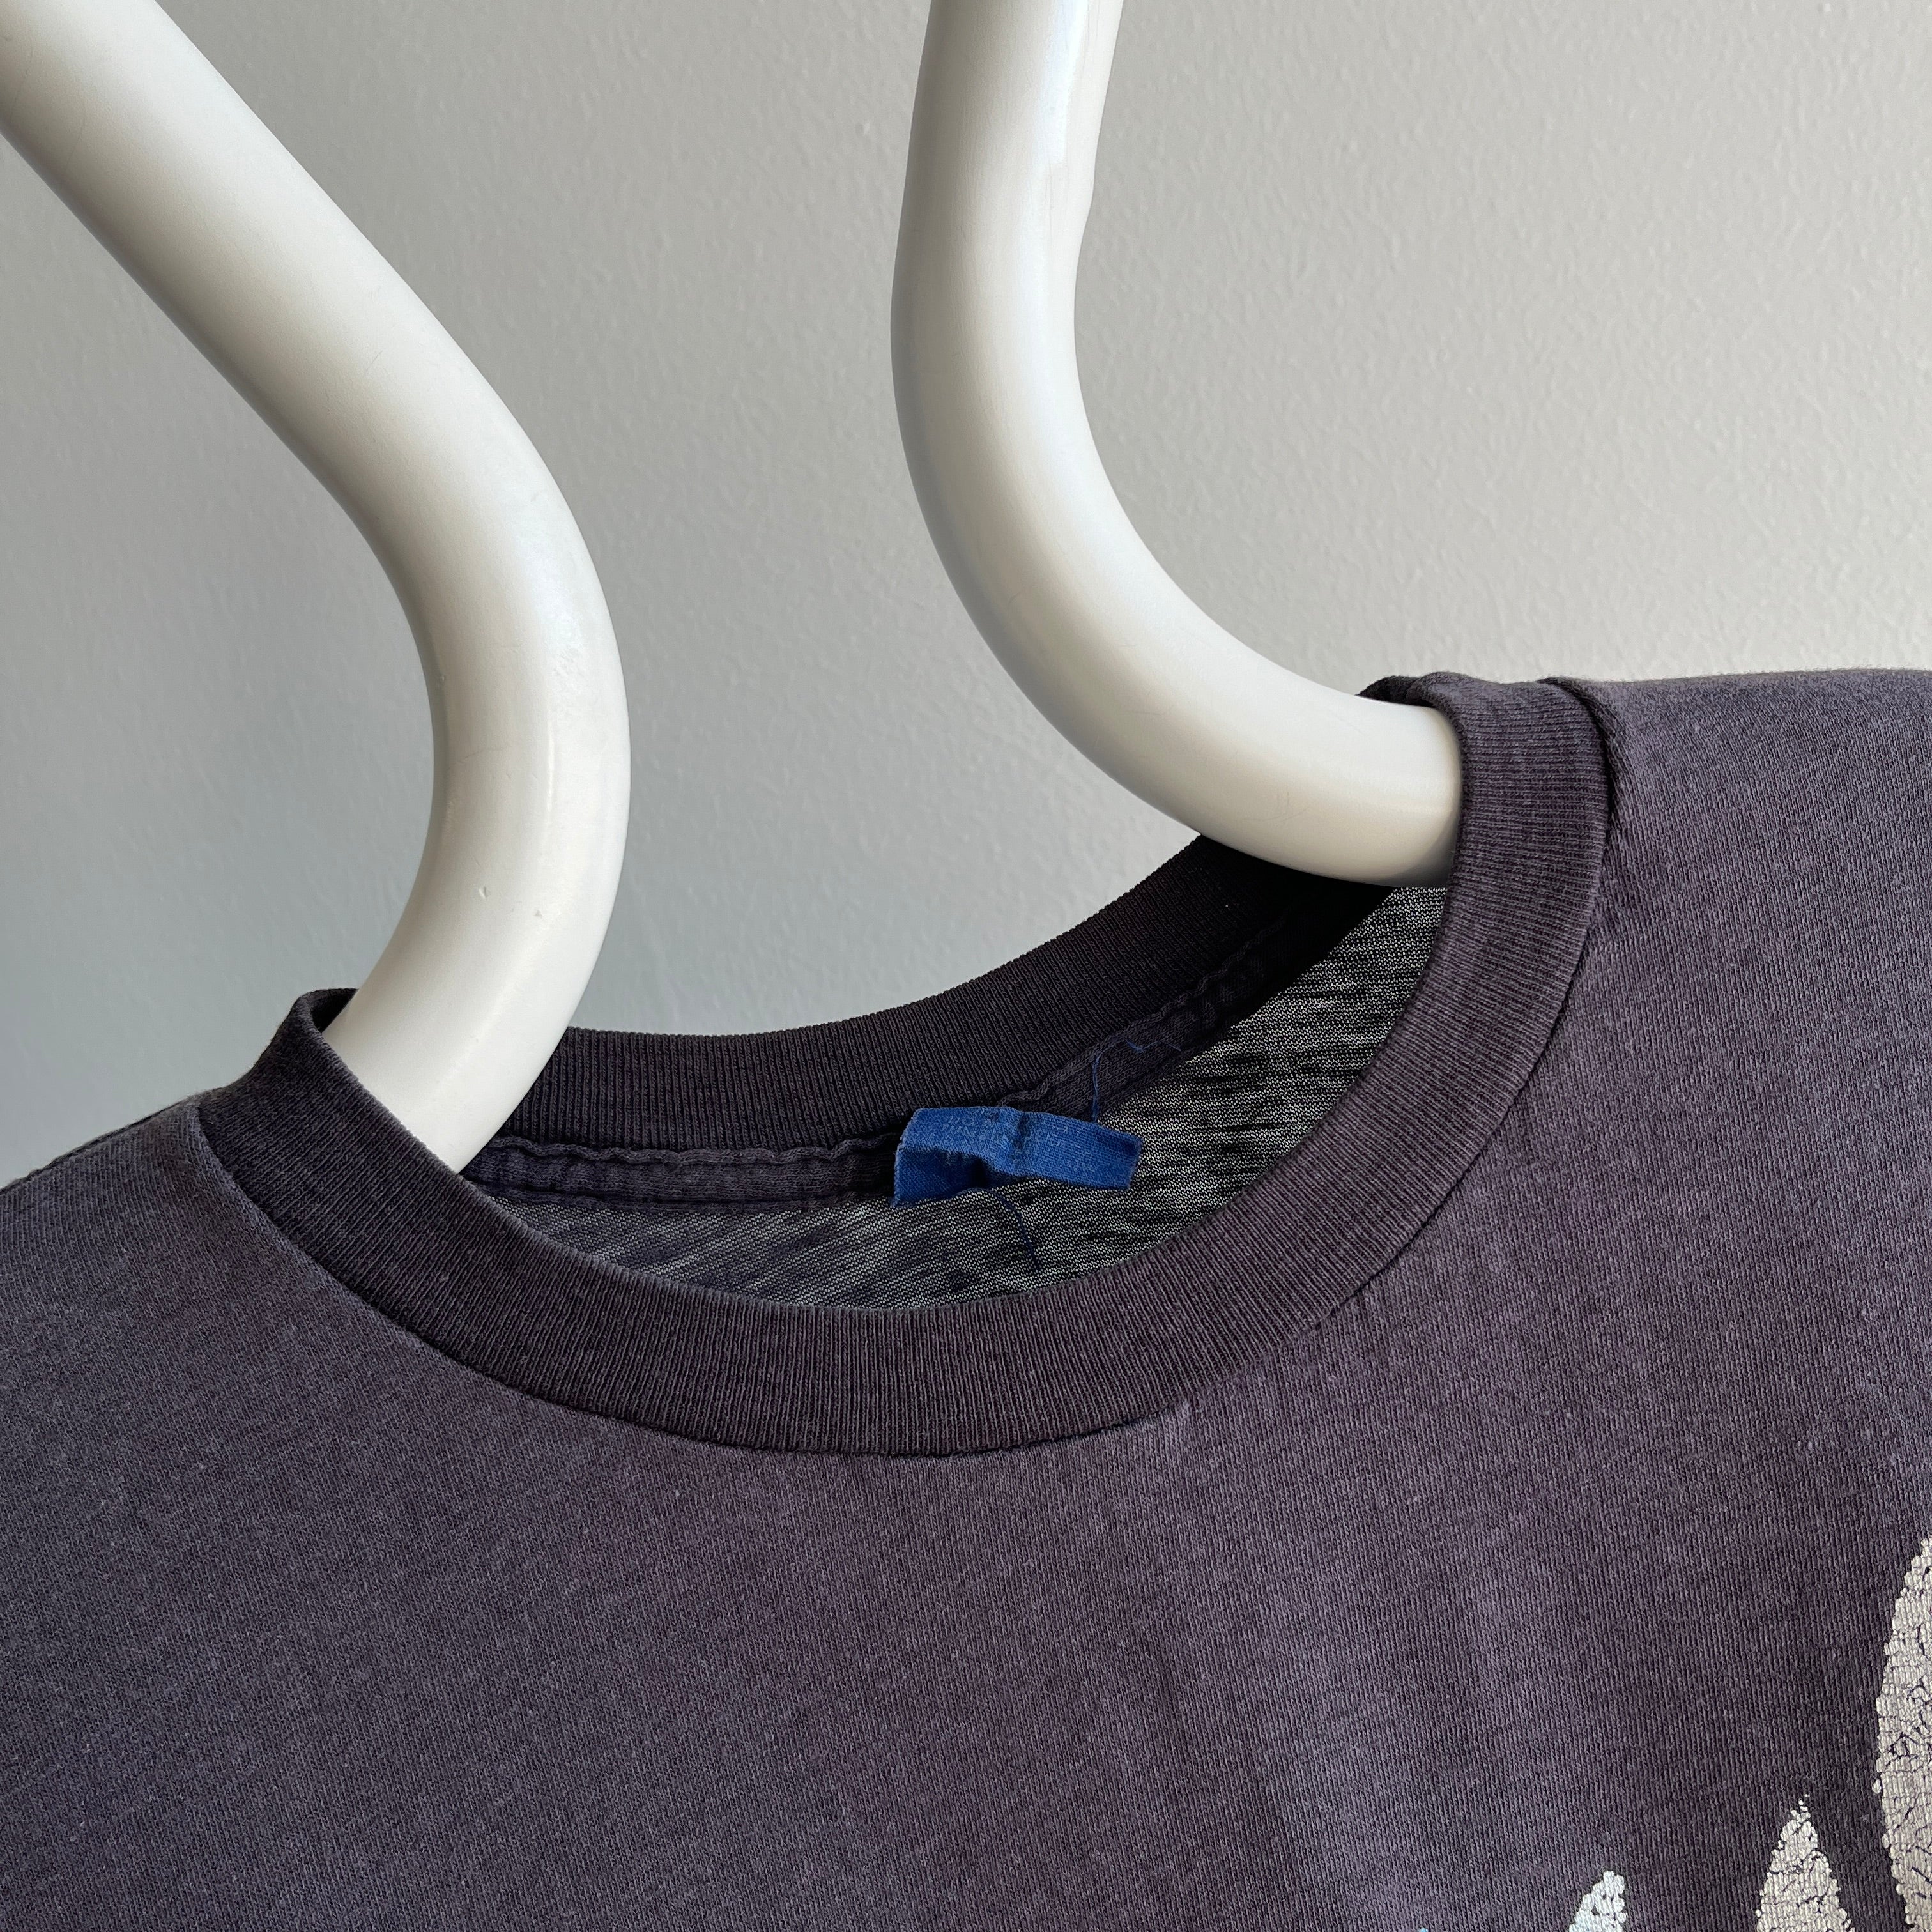 1980s Bluefish Soft and Slouchy T-Shirt